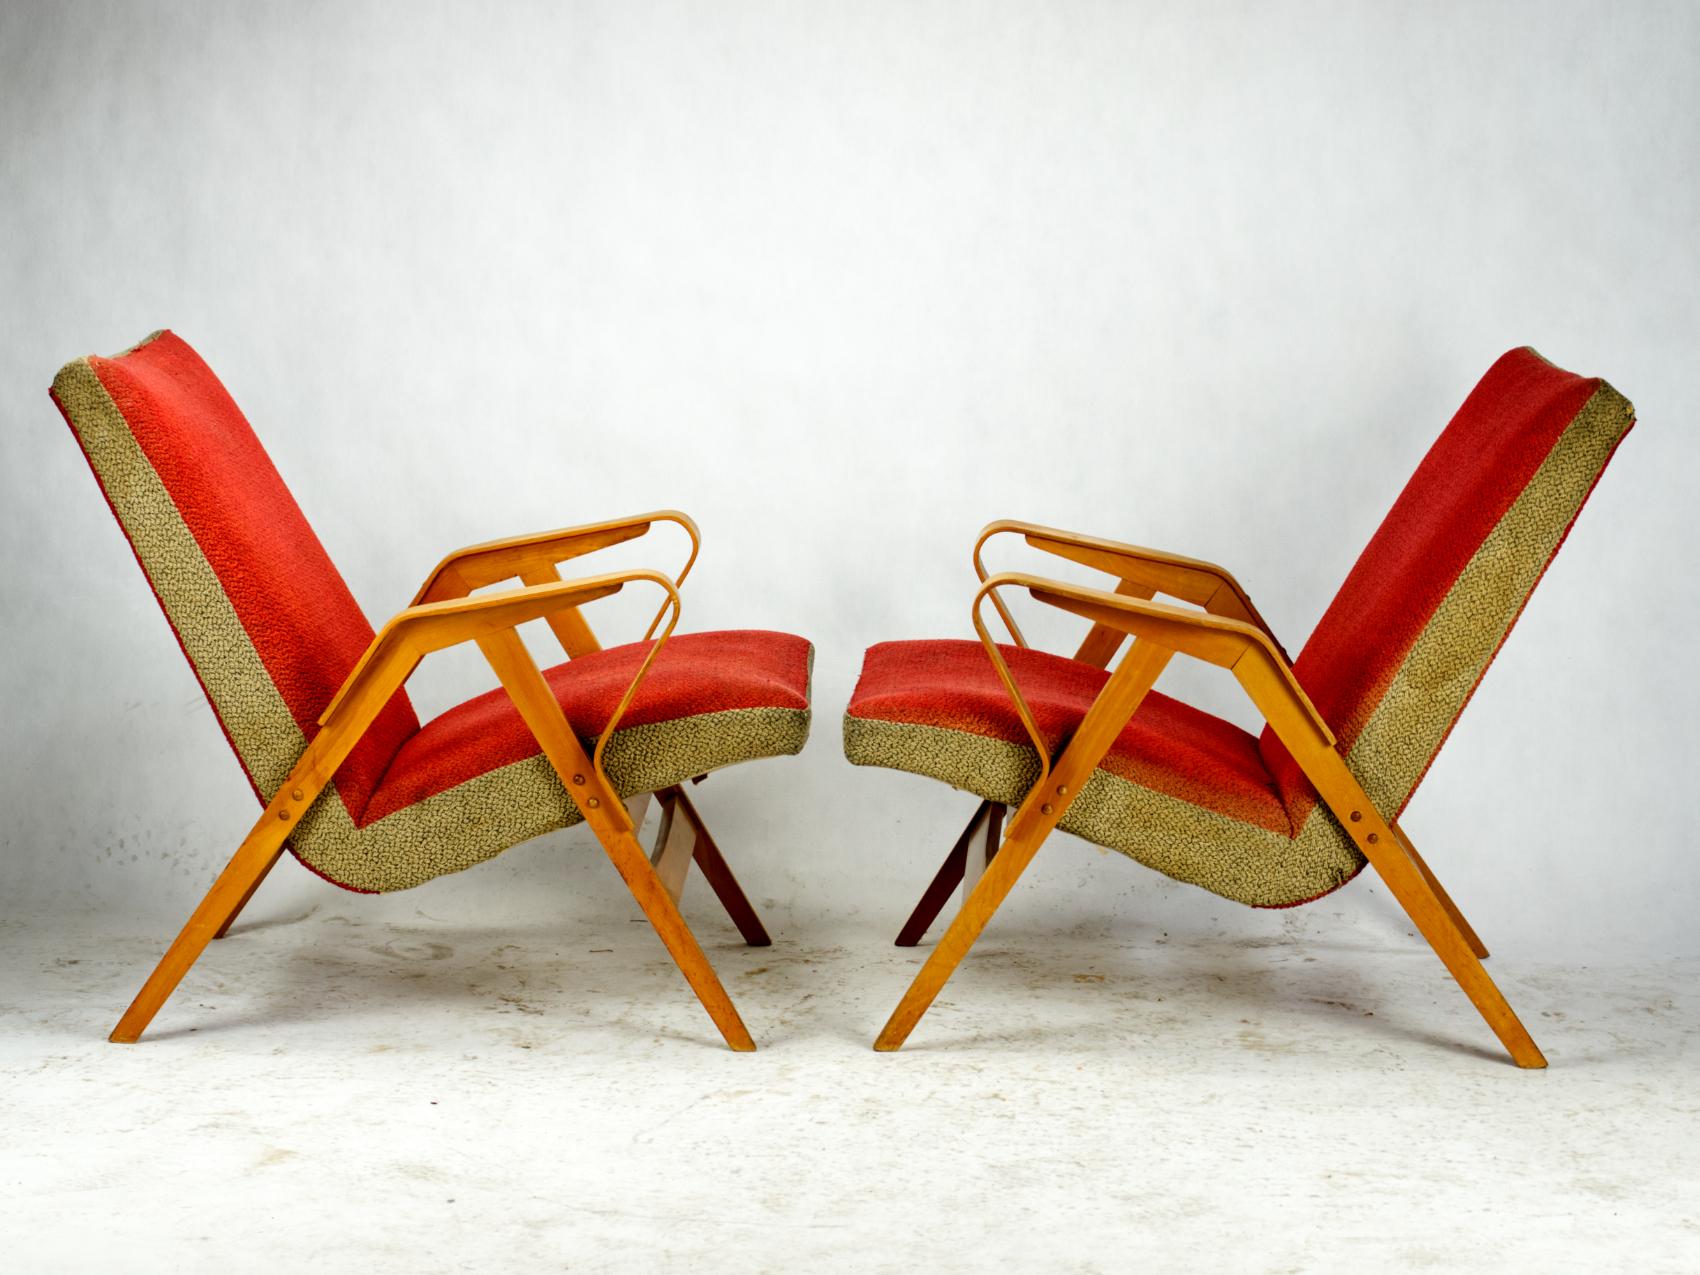 Armchairs produced by Tatra Nábytok Czechoslovakia, in the 1960s in original upholstery.
The chairs are in a good vintage condition, upholstery is faded and worn out, wood is in good condition.
Very comfortable larger model with original